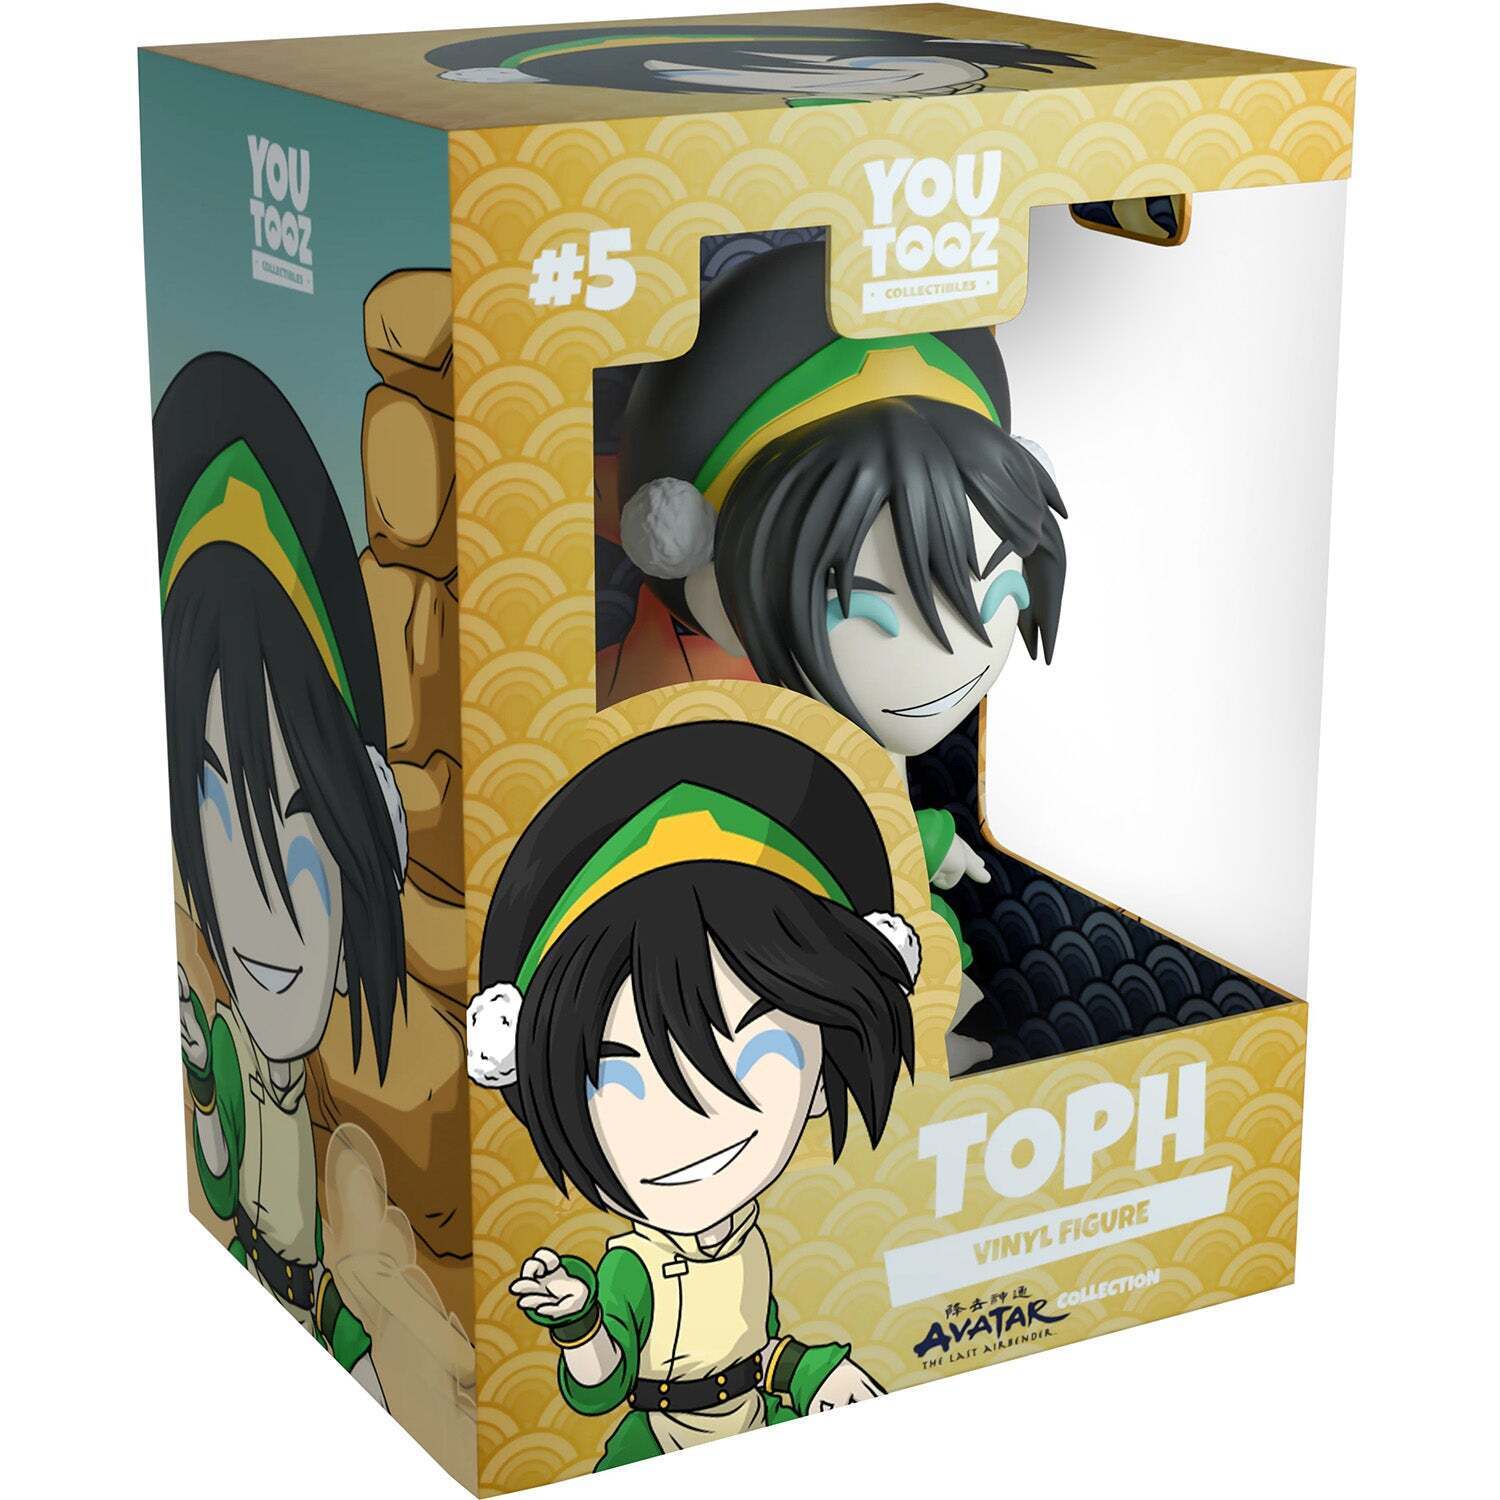 Youtooz Avatar: The Last Airbender Collection - Toph [Toys, Vinyl Figure]